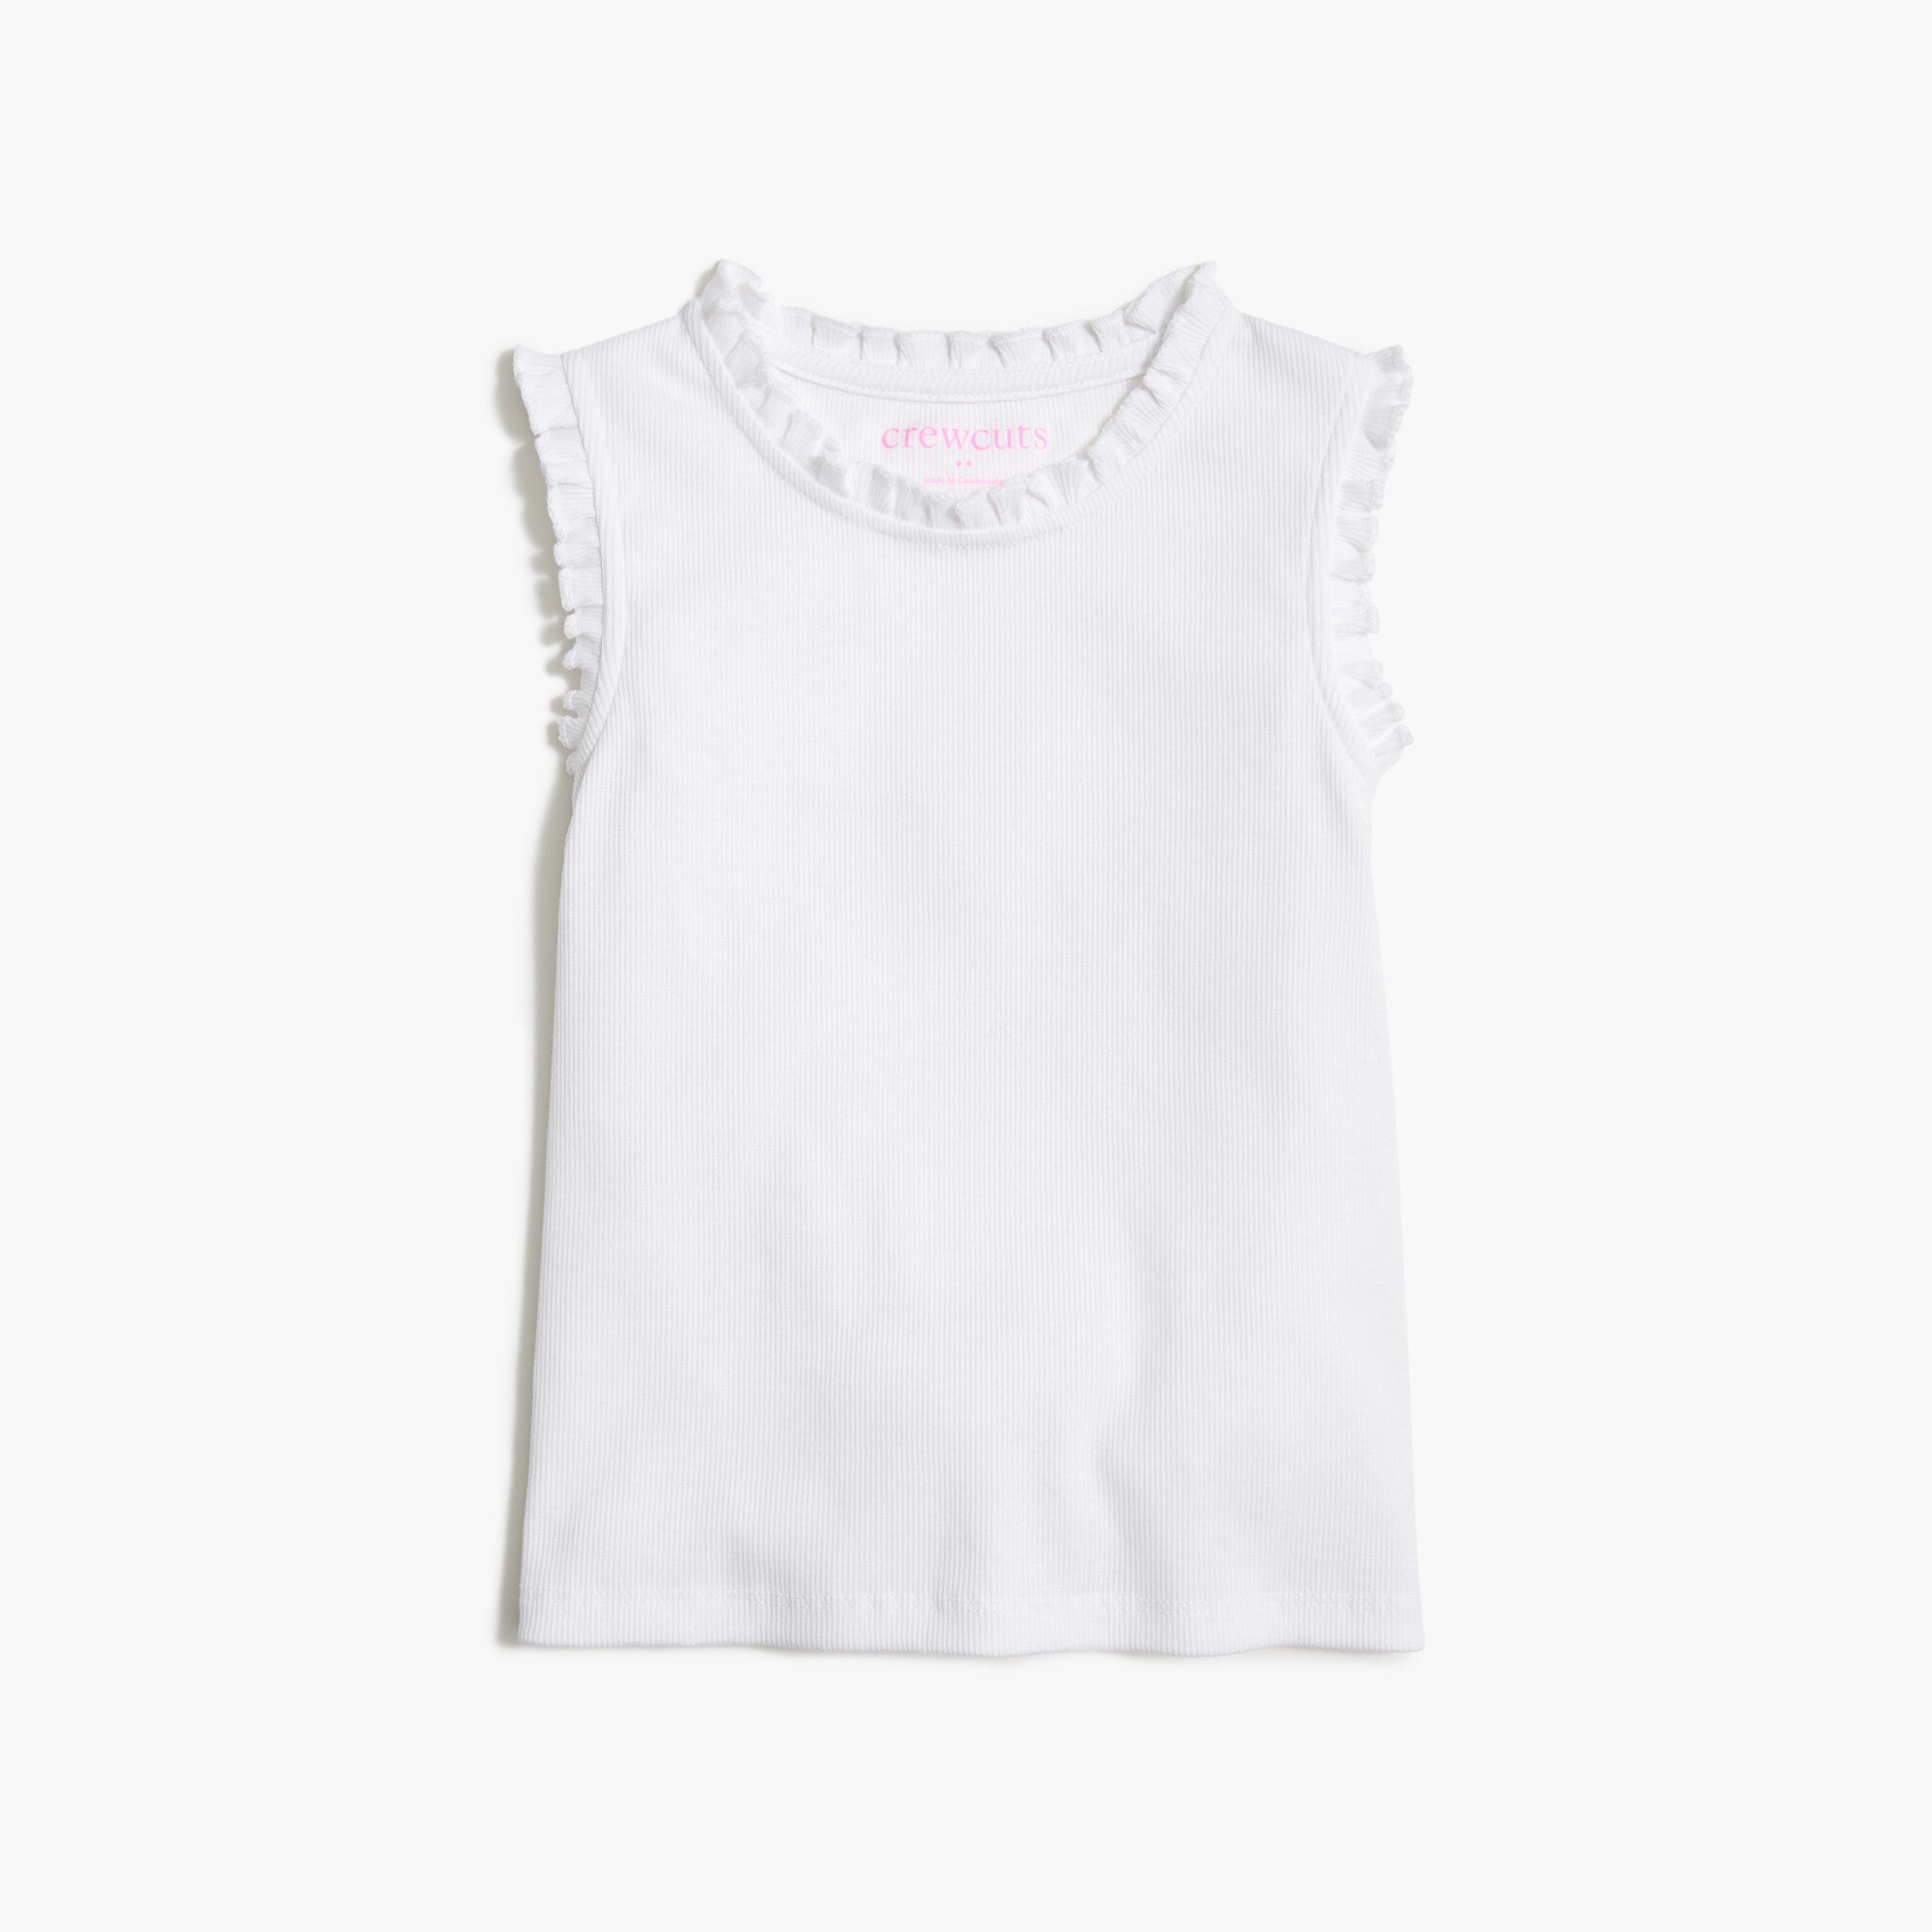  Girls' ribbed tank top with ruffle trim